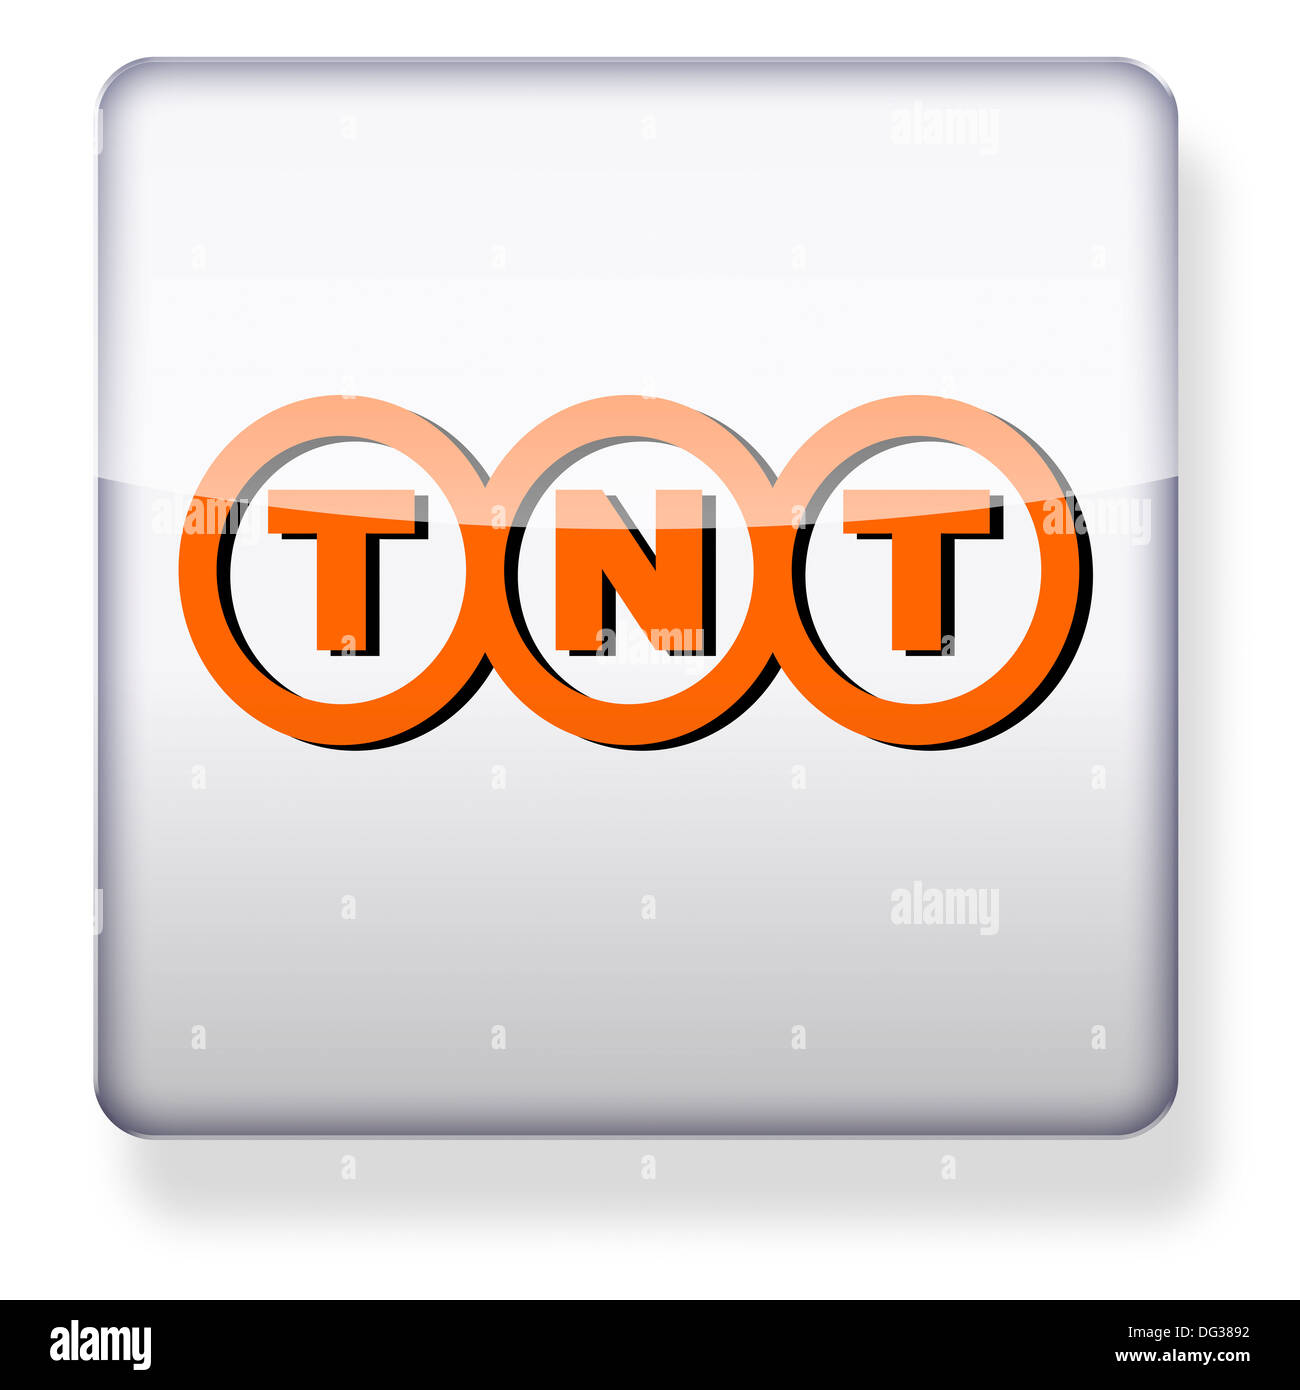 TNT Express logo as an app icon. Clipping path included. Stock Photo